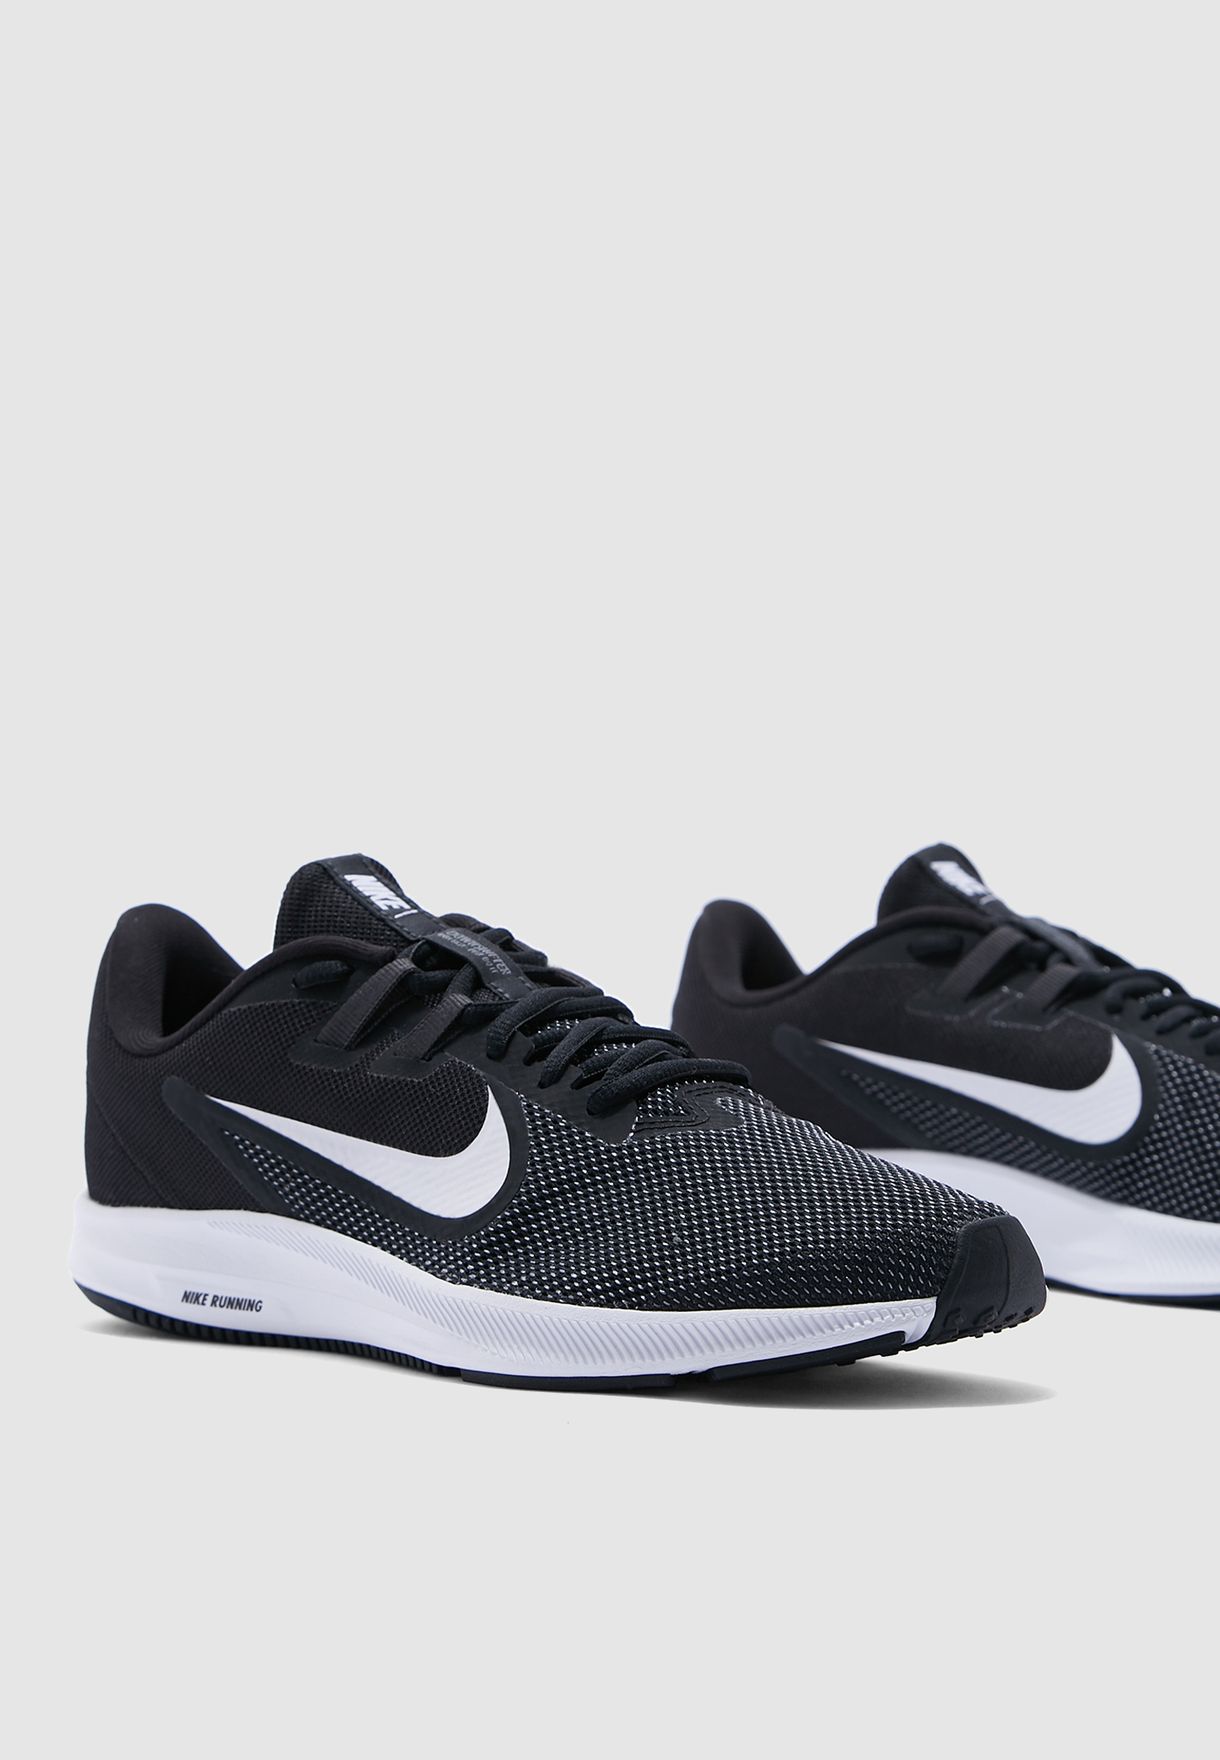 nike downshifter 9 price